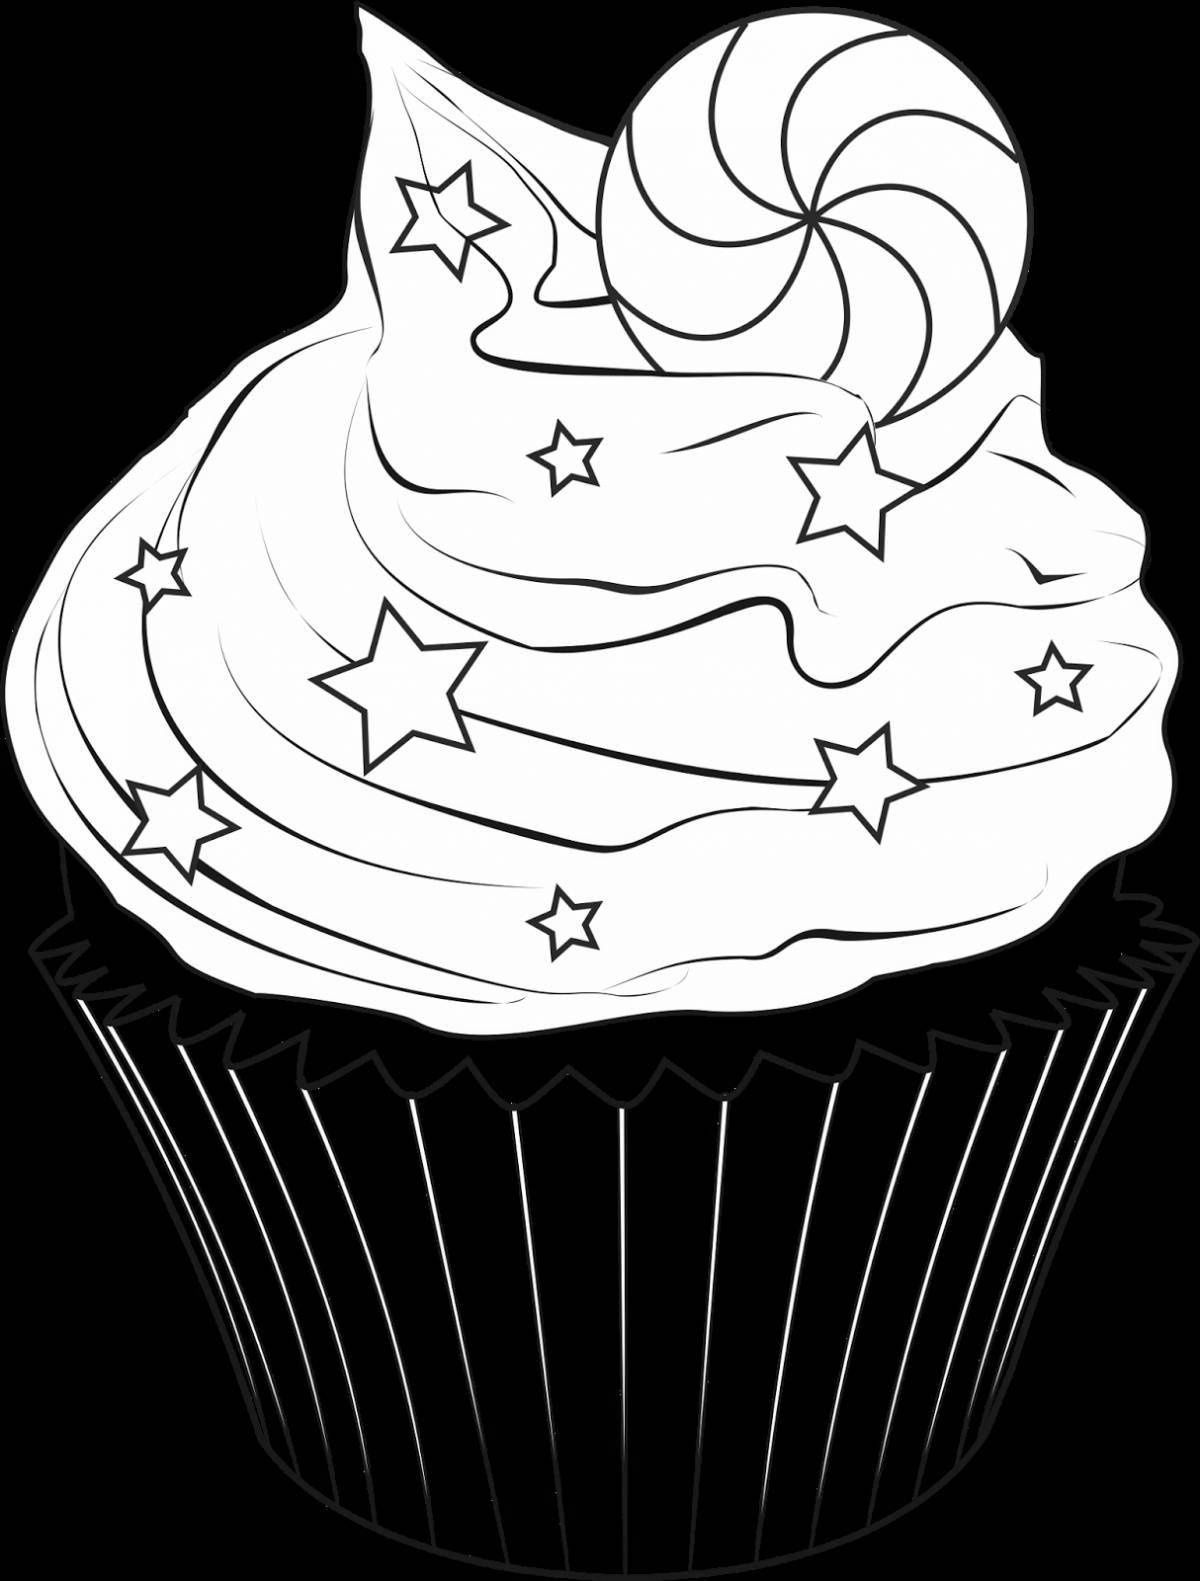 Wonderful sweets coloring pages for girls